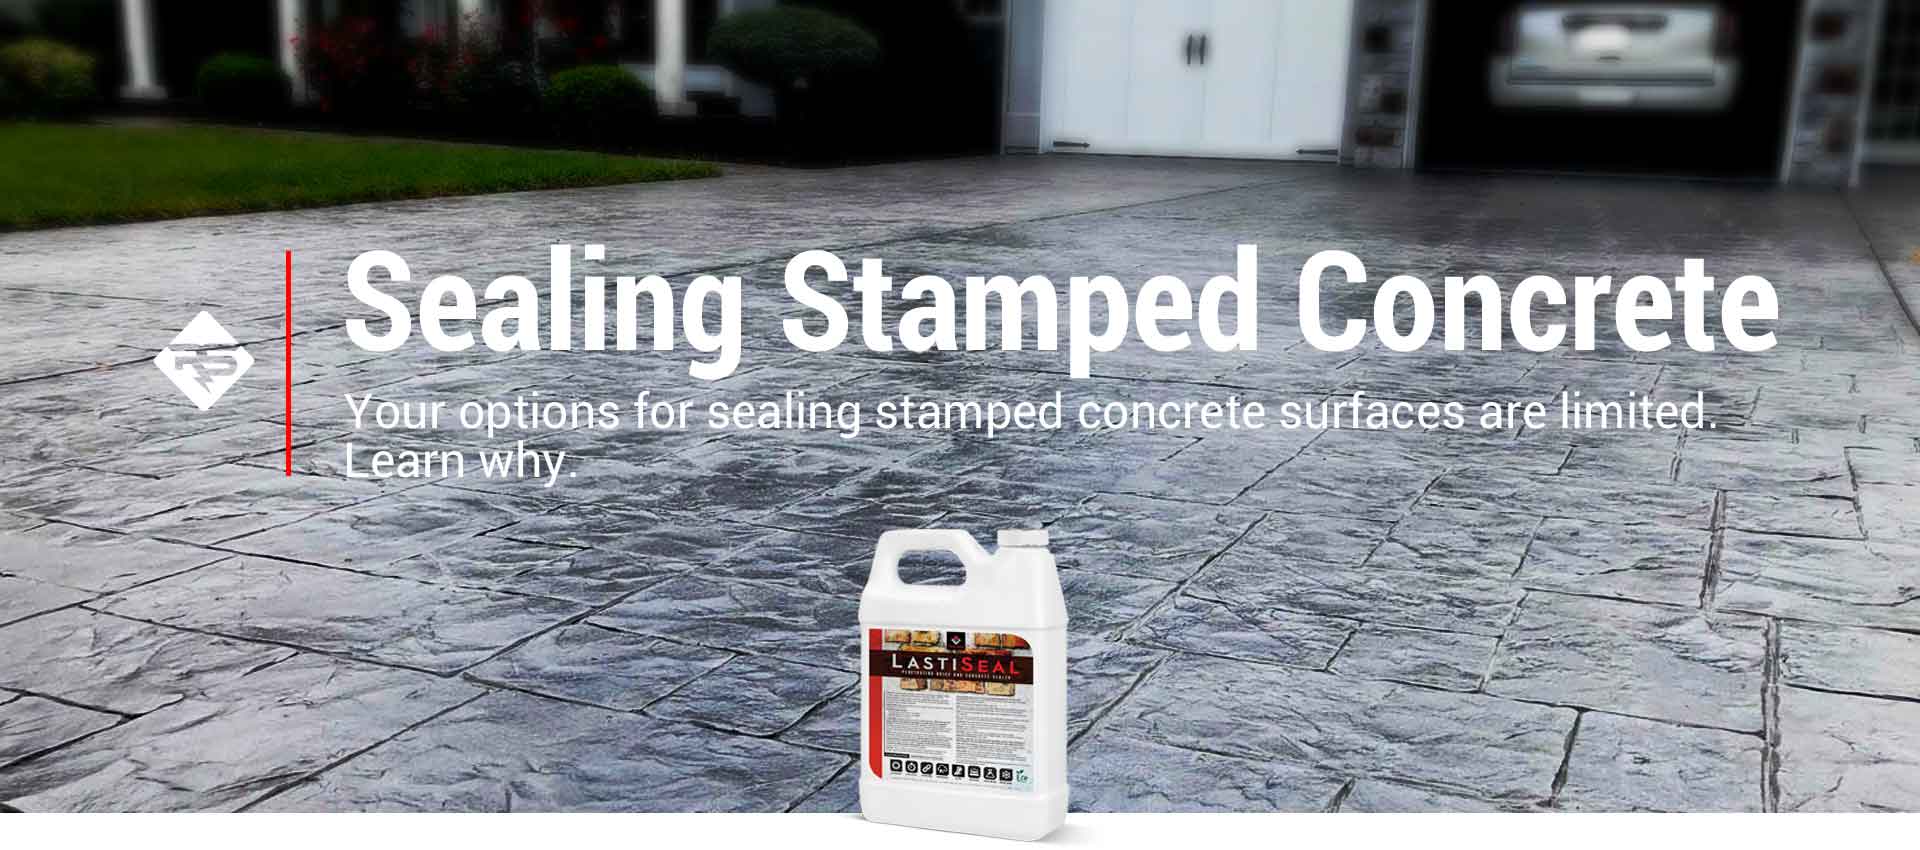 How To Seal Stamped Concrete Driveways